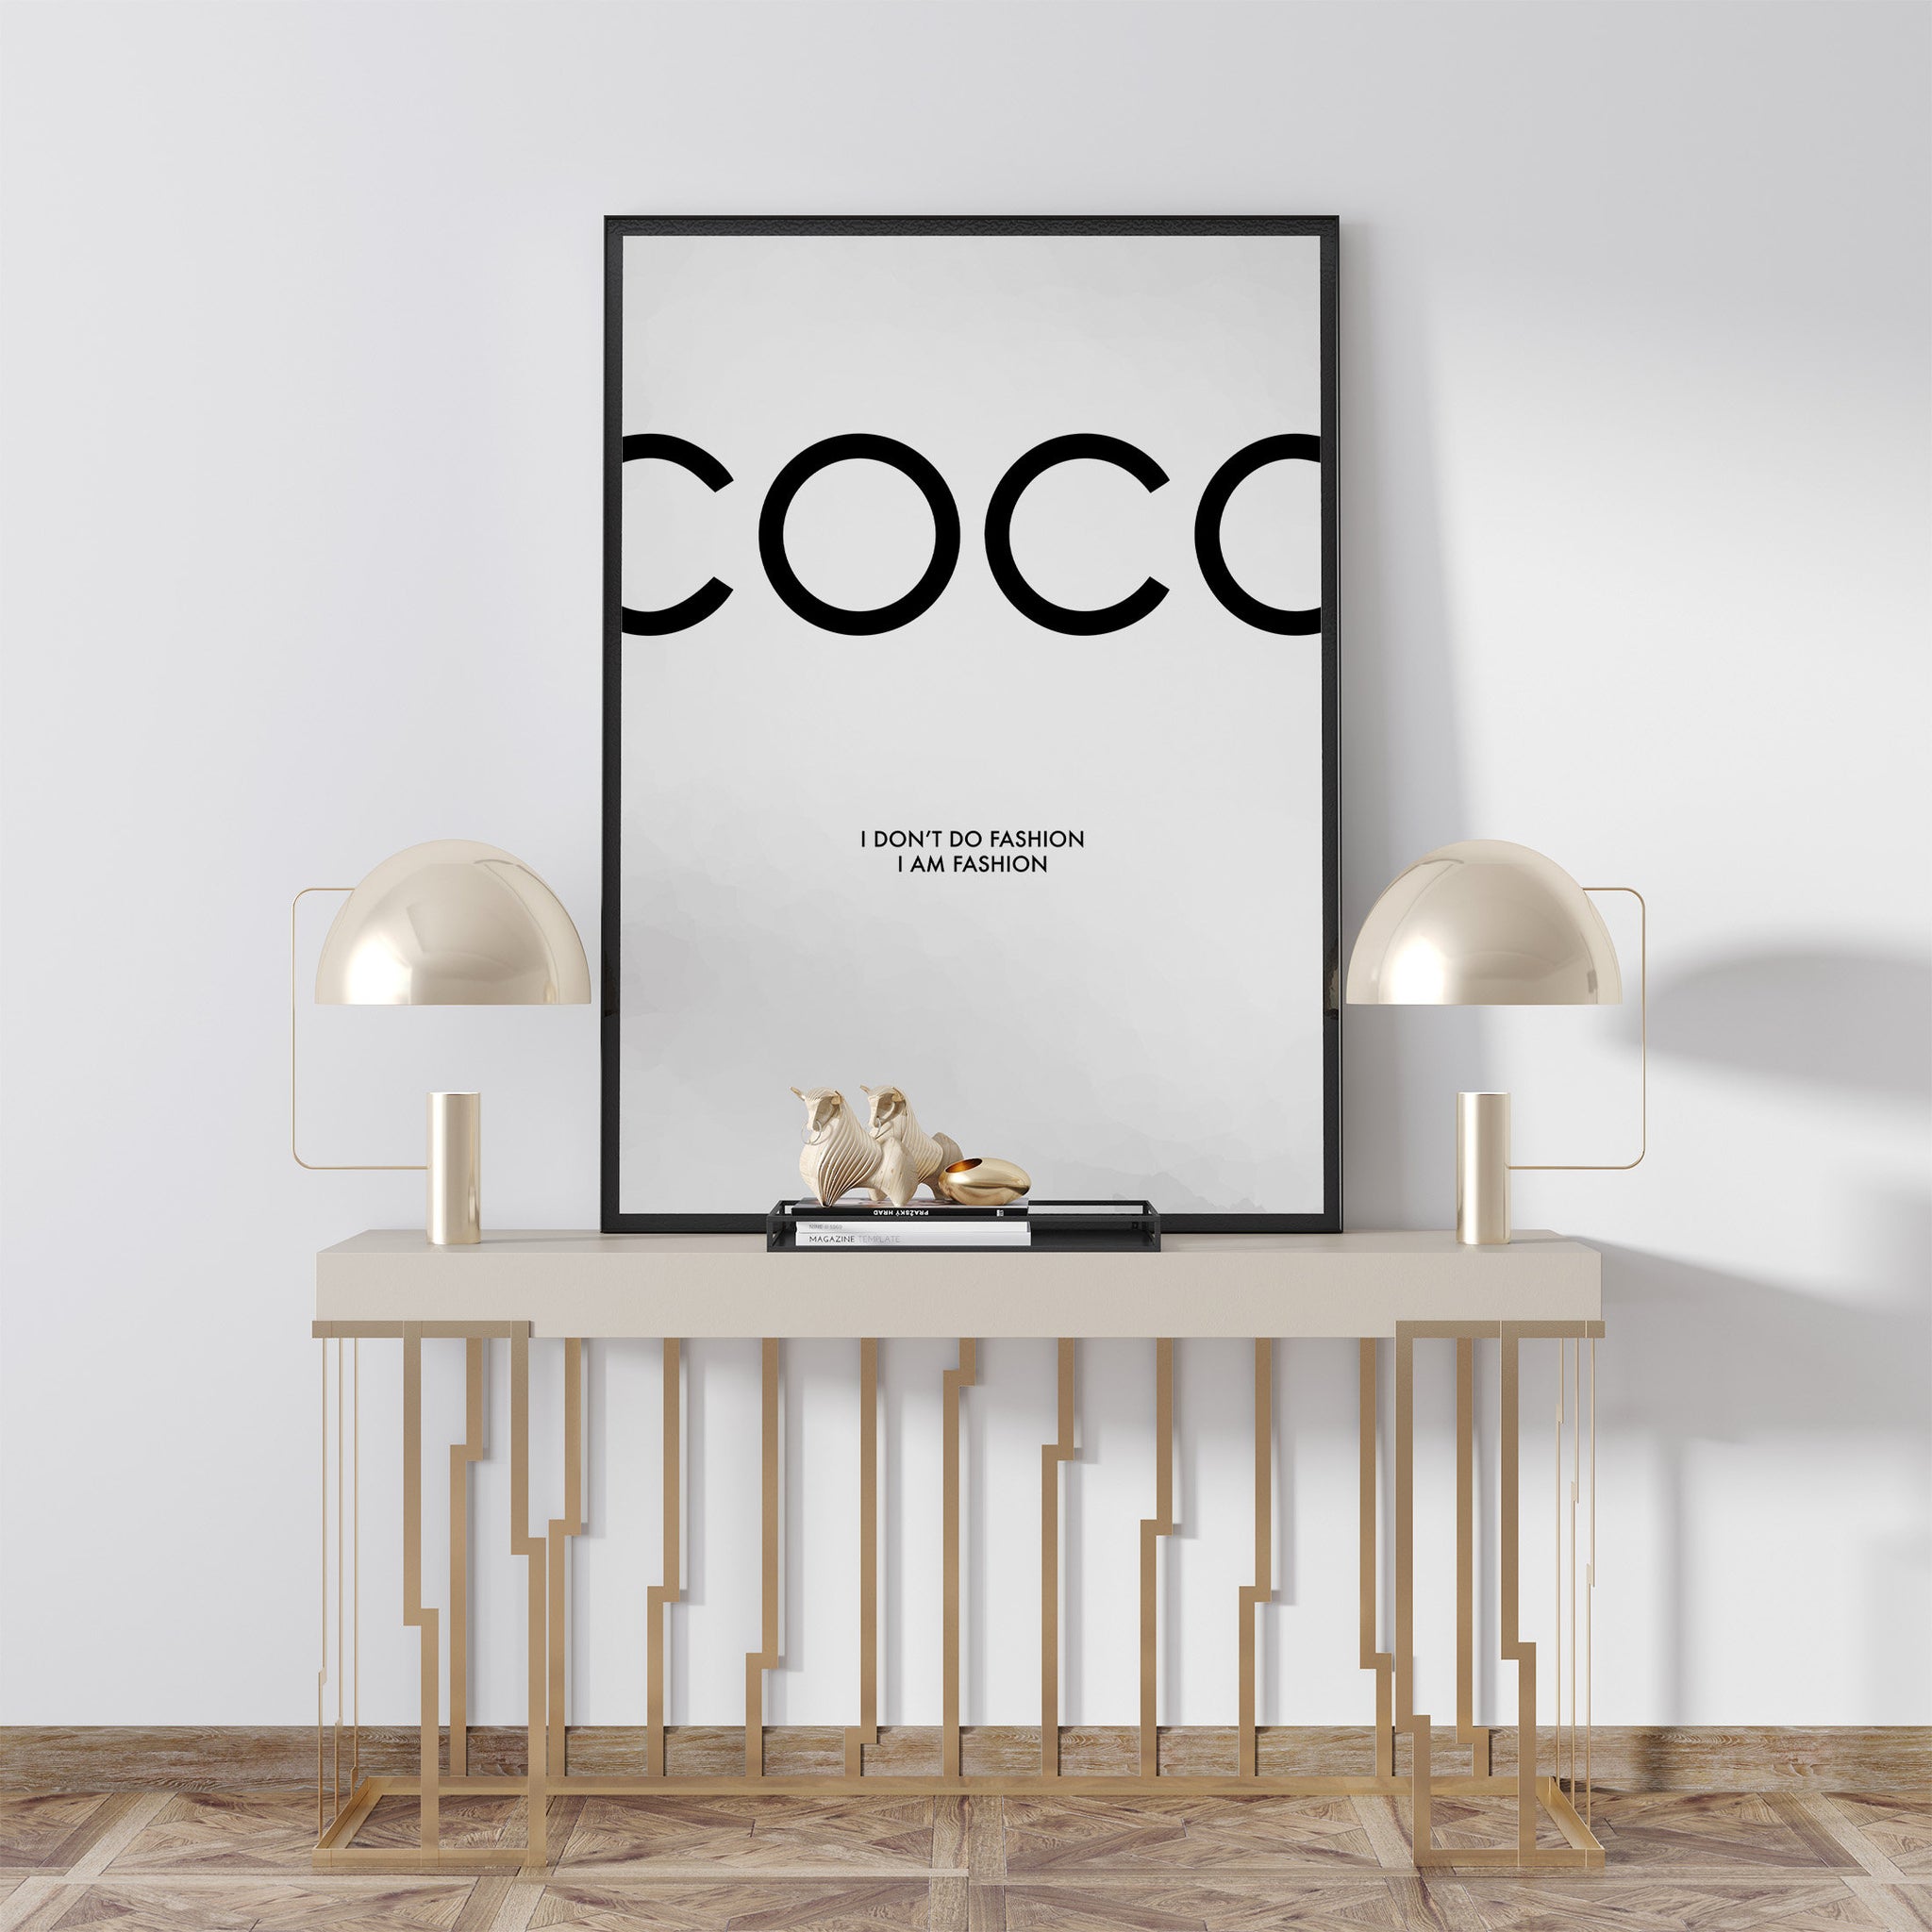 Set of 3 Coco Chanel Graphical Prints